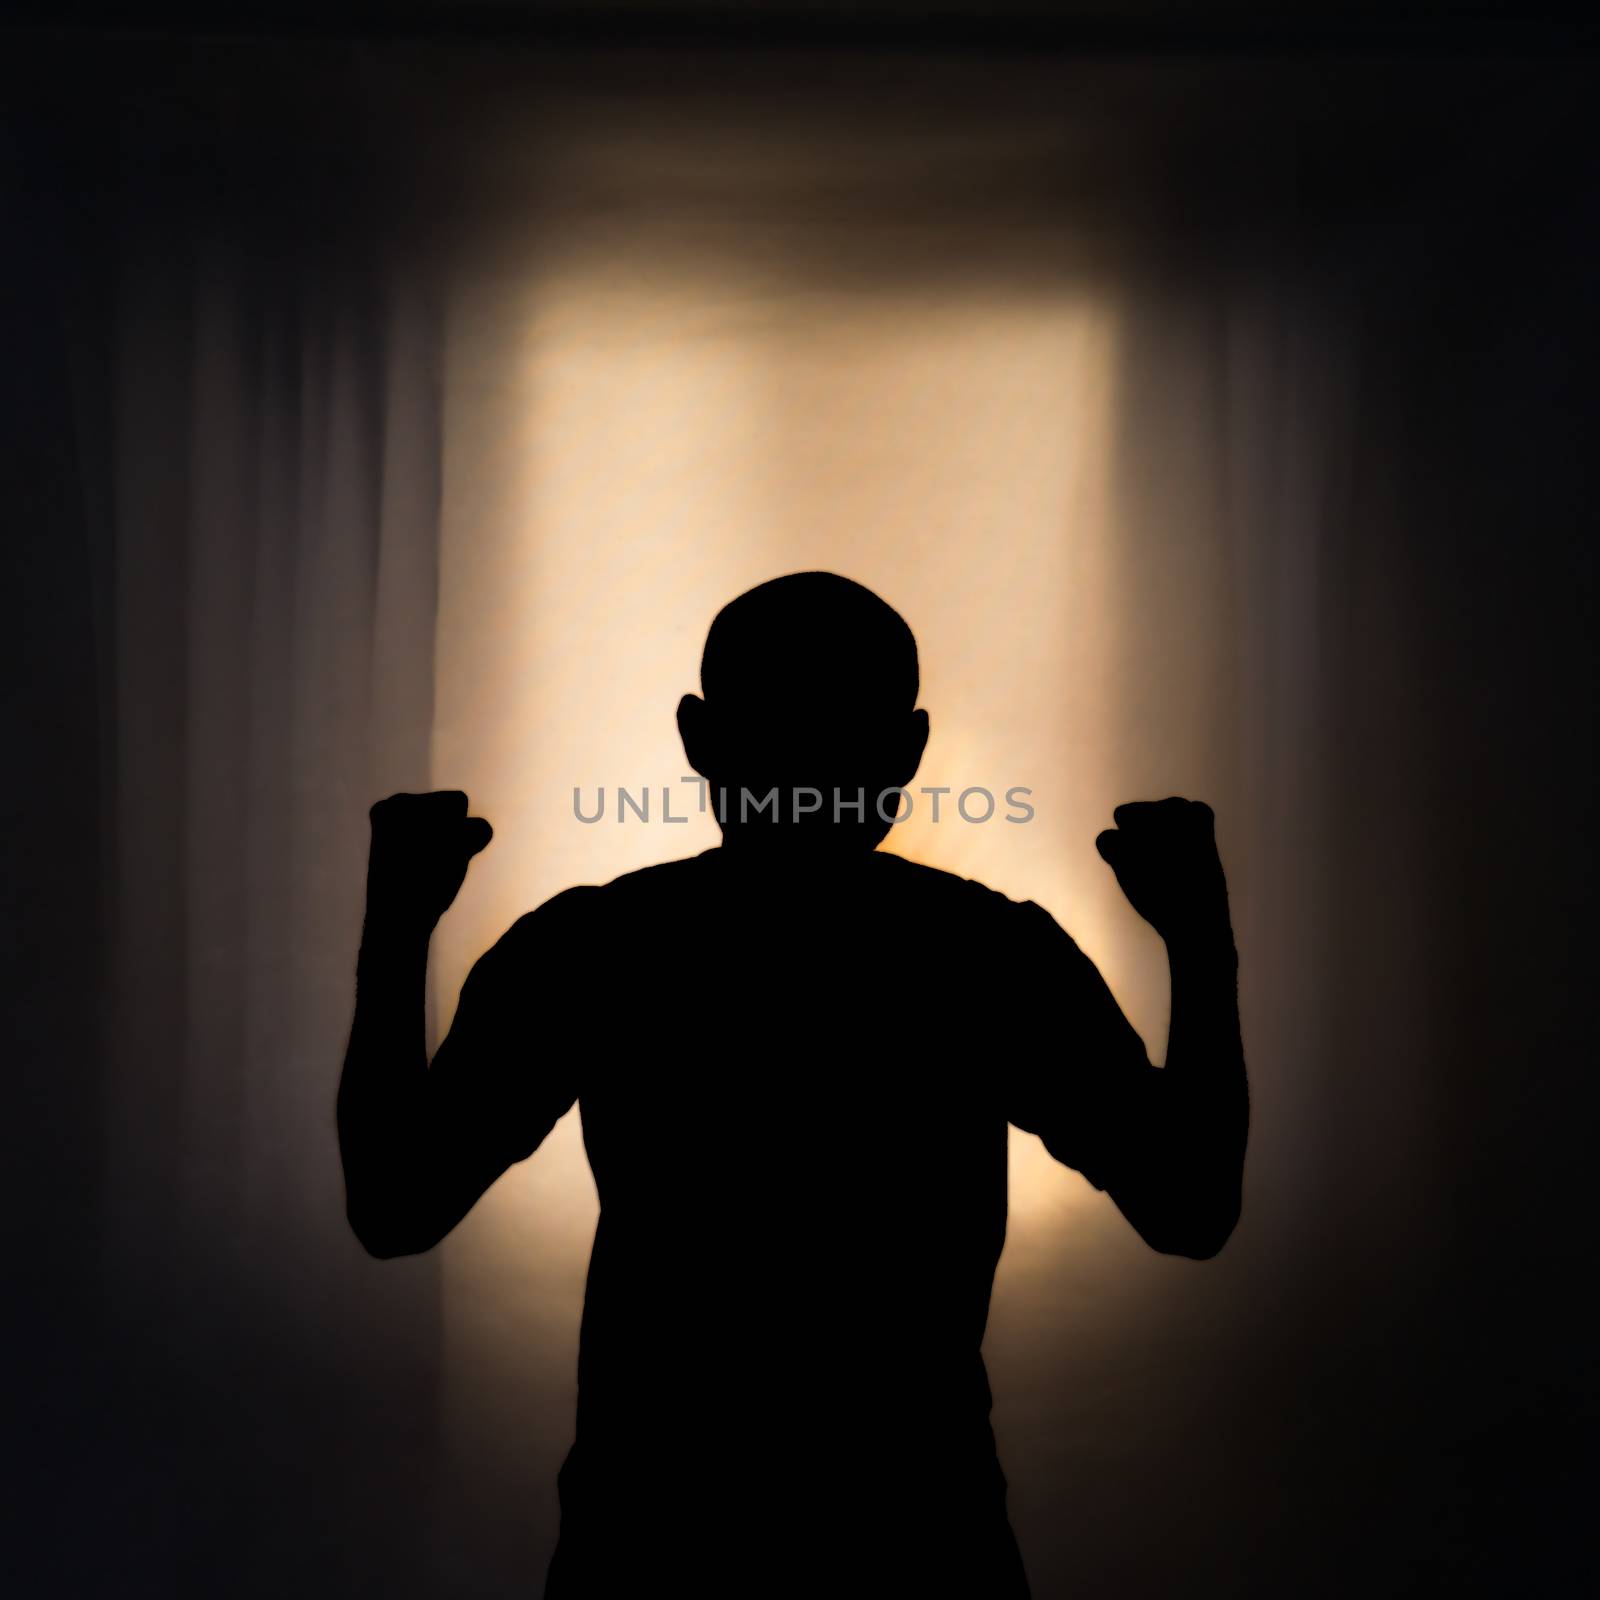 Silhouette of angry man with light from window background